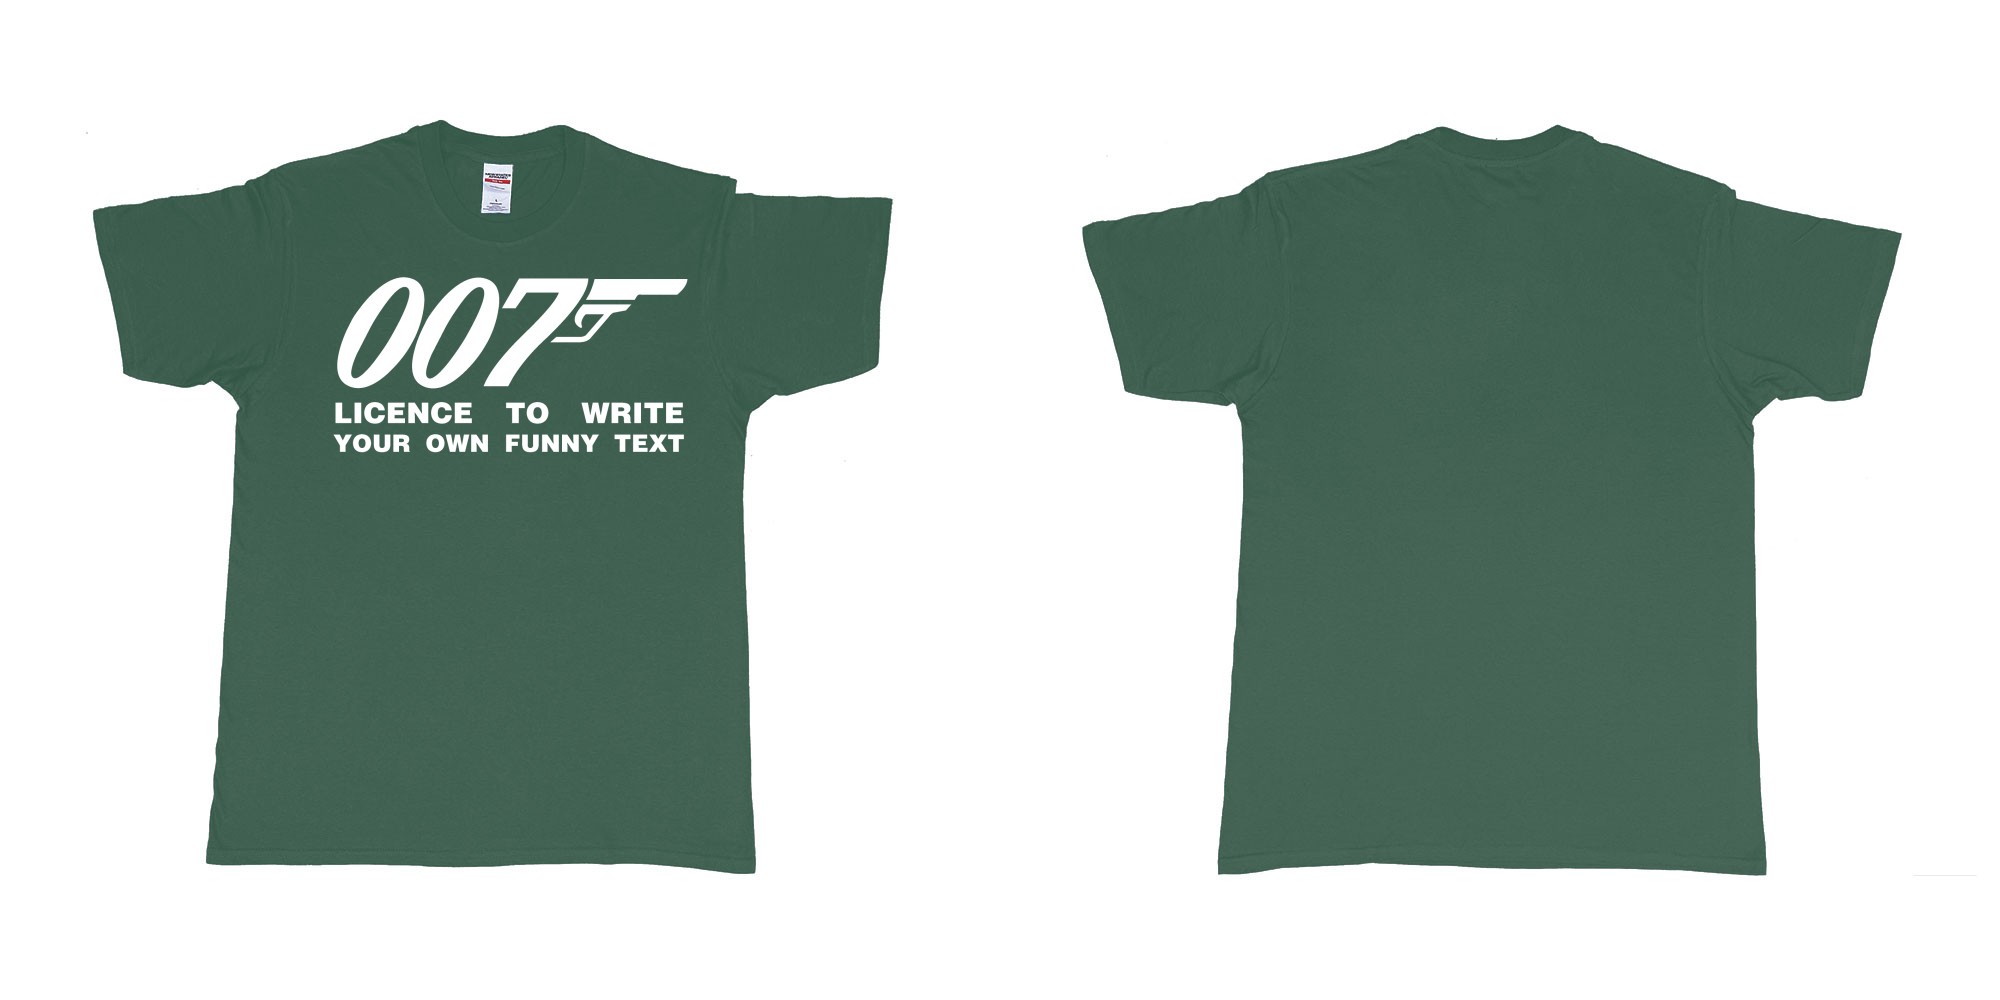 Custom tshirt design james bond logo licence to write own custom text print in fabric color forest-green choice your own text made in Bali by The Pirate Way